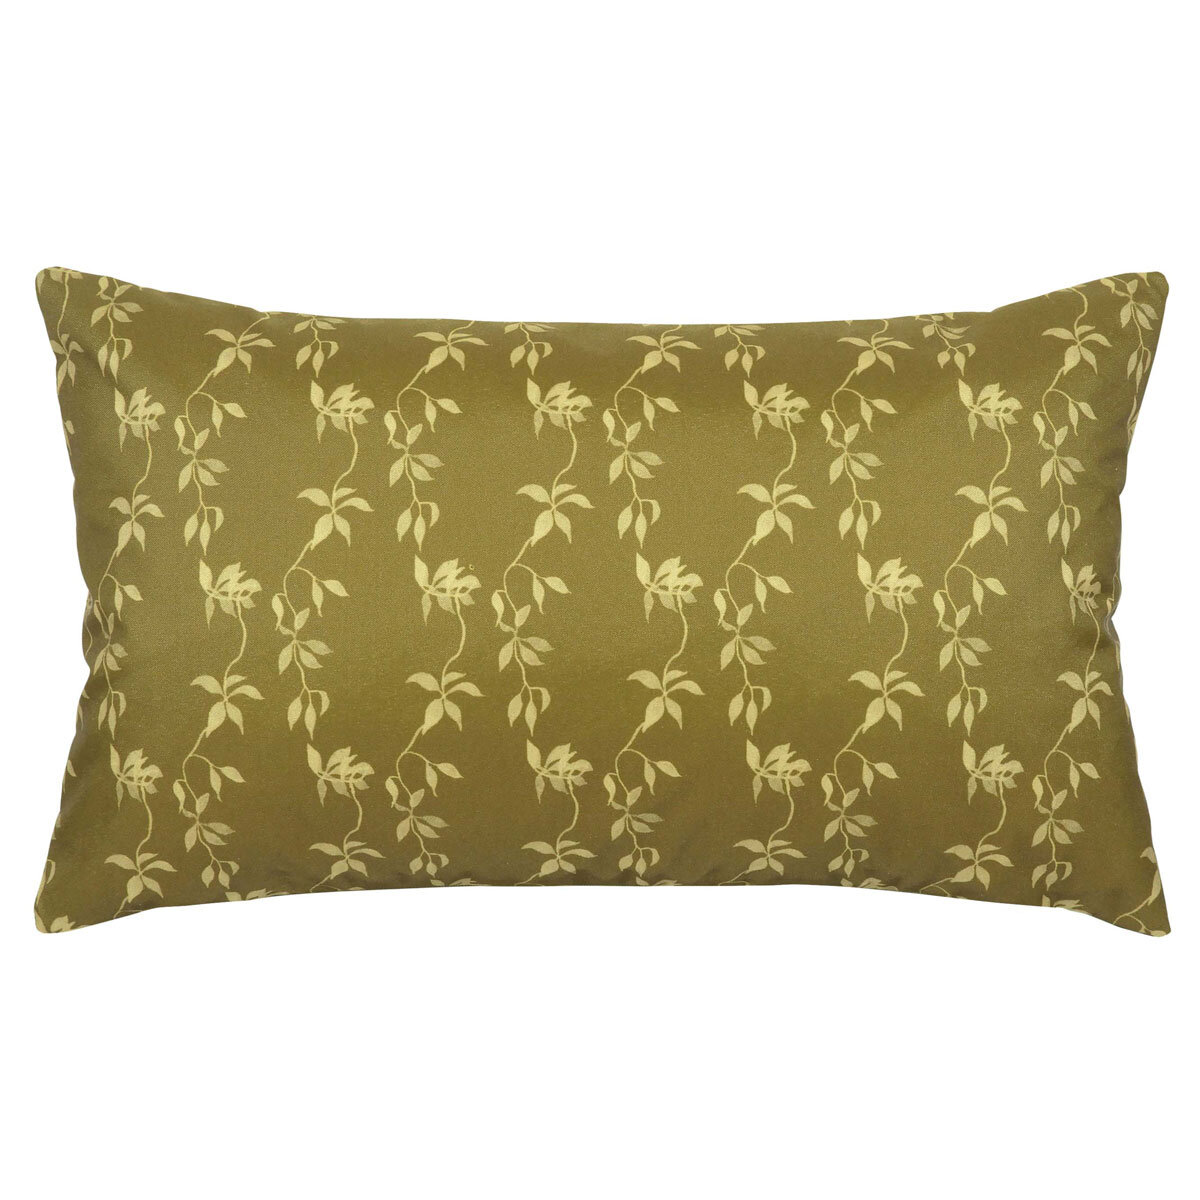 Riva Home Leopard Oblong Outdoor Cushion 30x50cm 2 pack